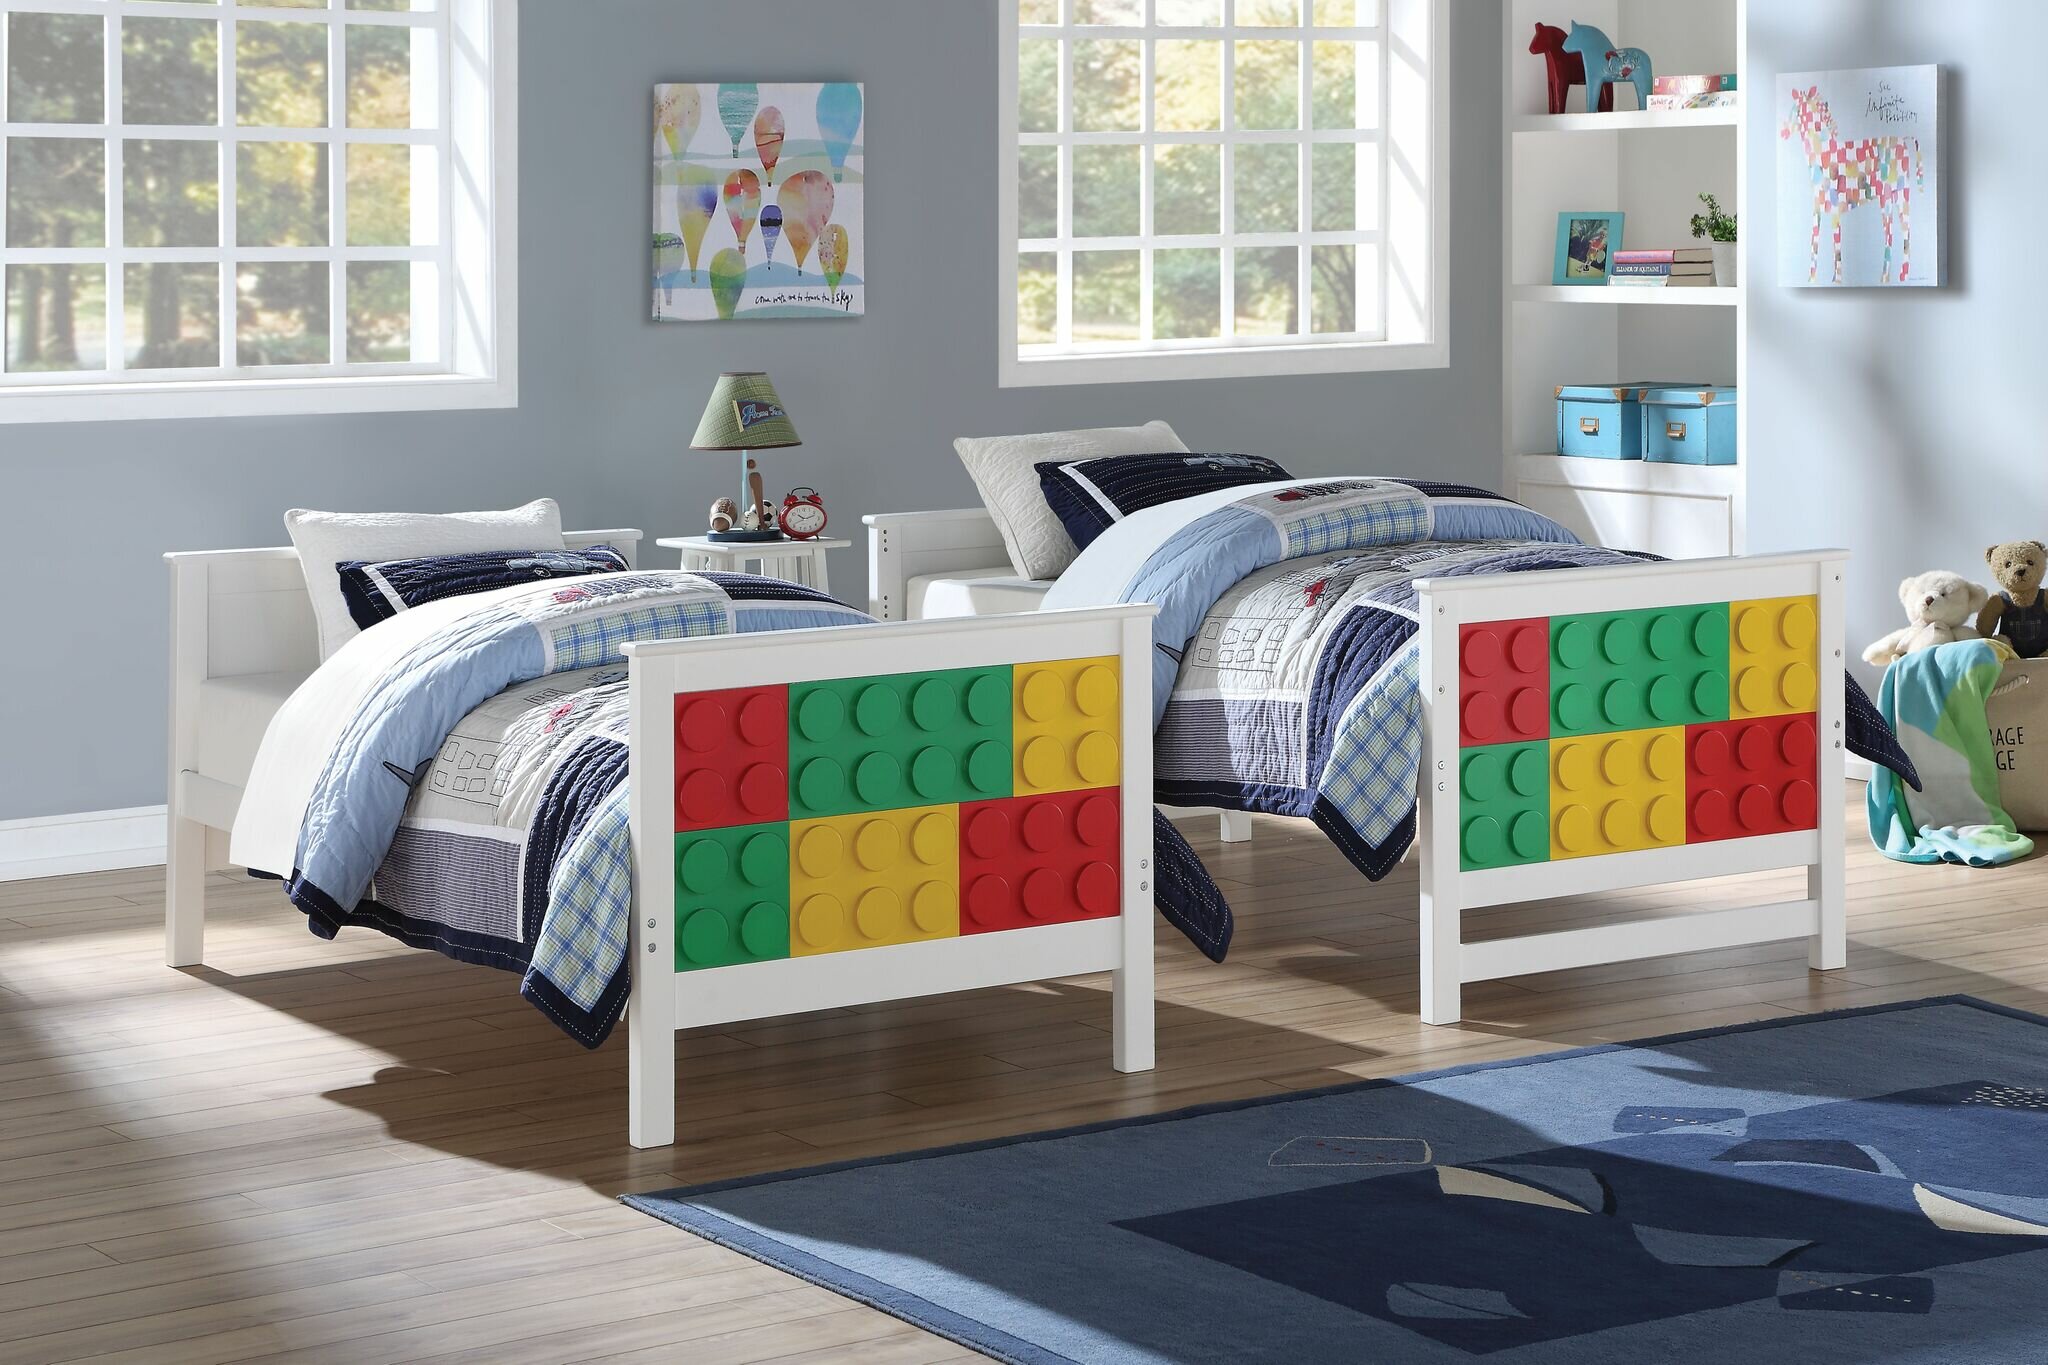 lego bunk beds for sale